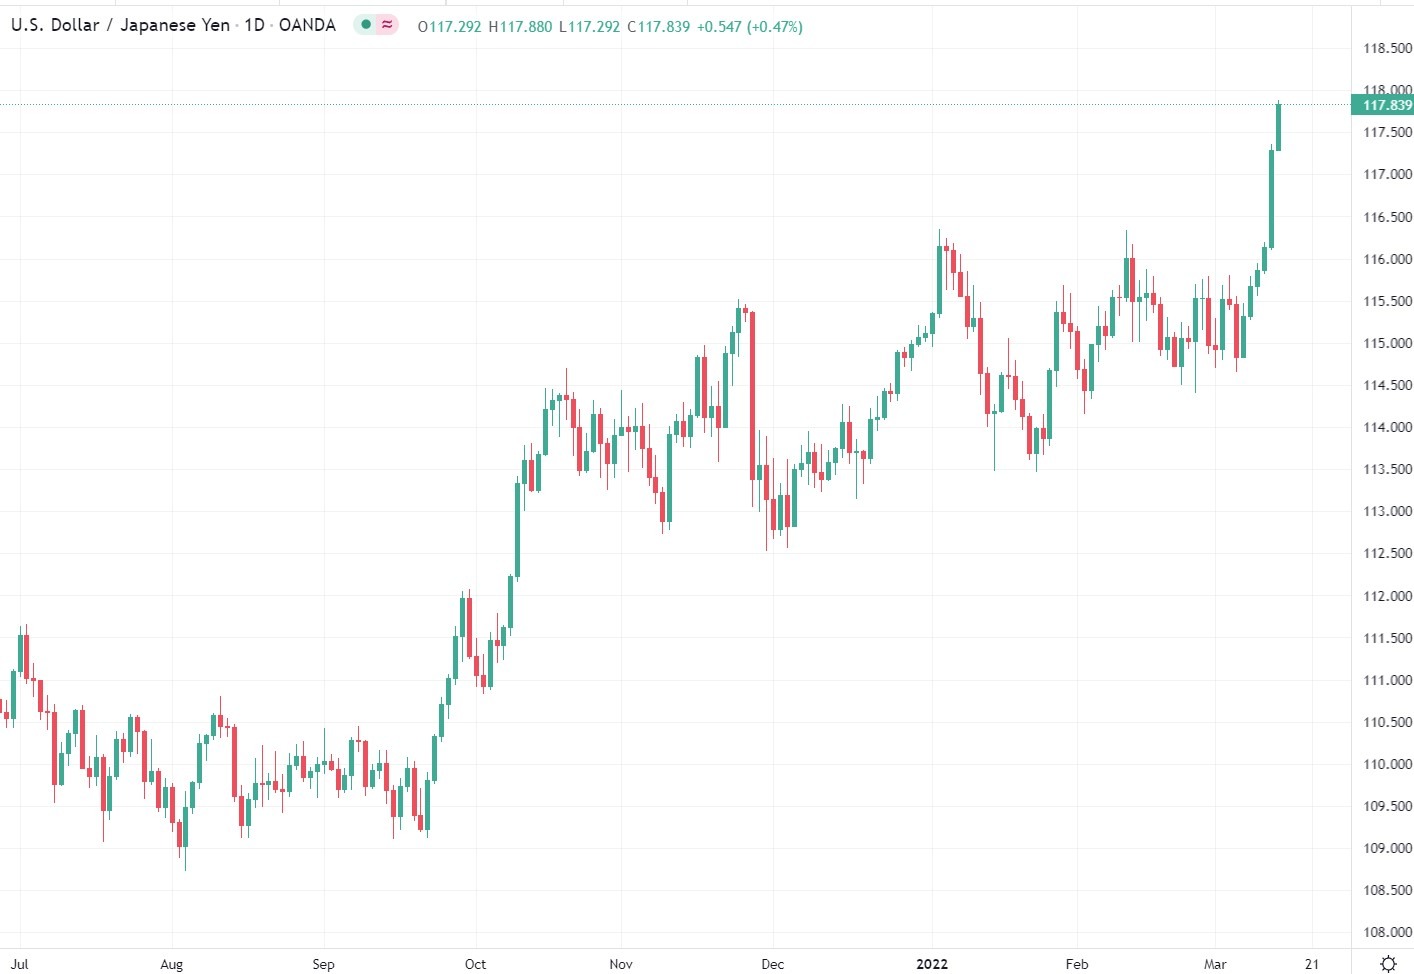 ForexLive Asia FX news wrap: USD higher amidst weaker risk markets